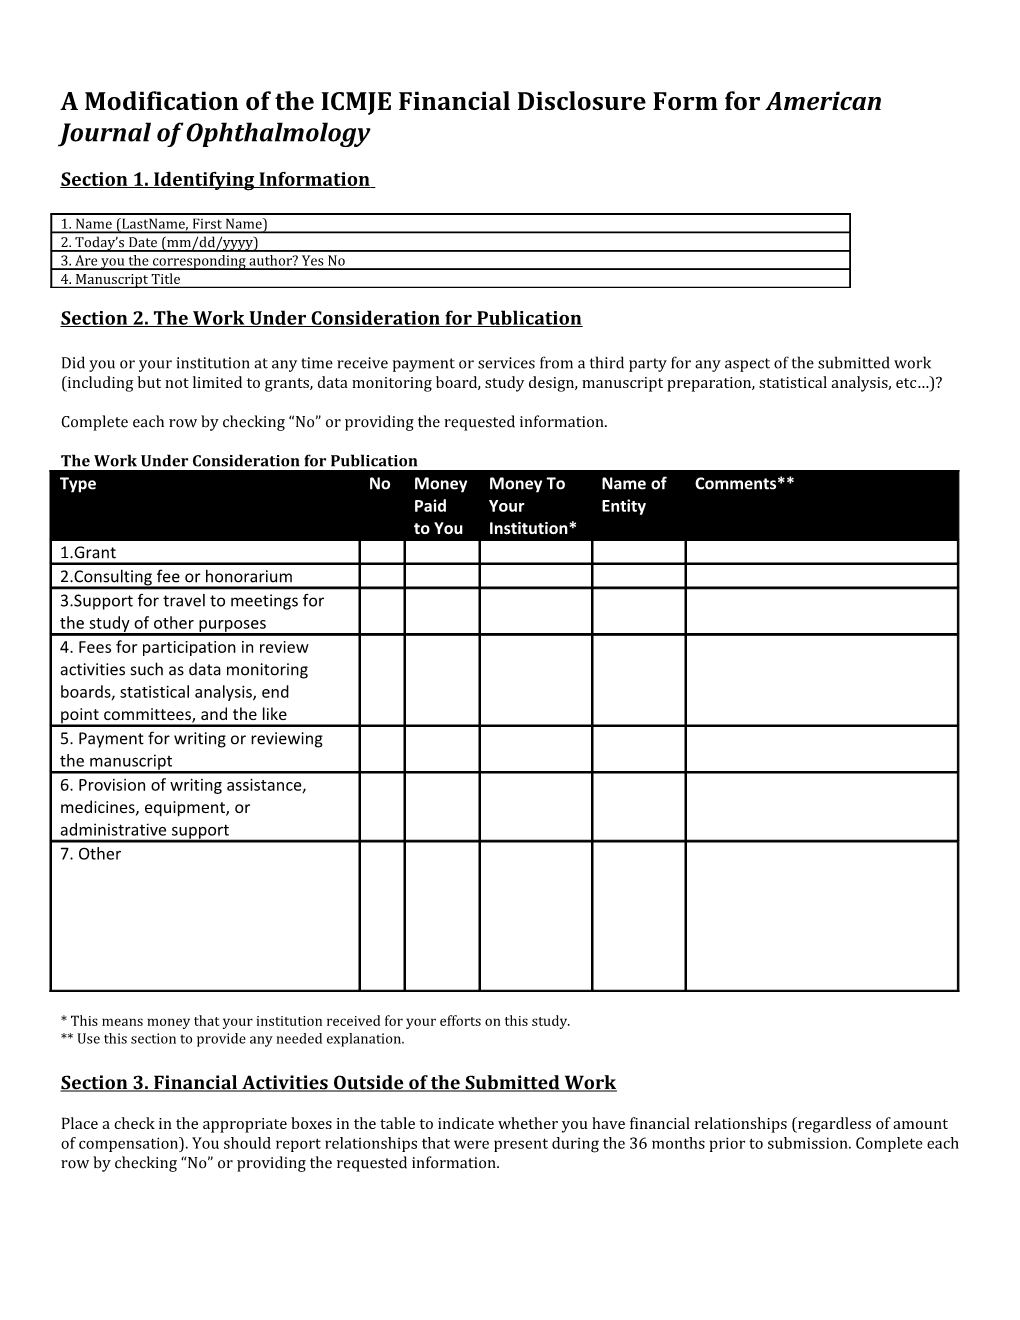 A Modification of the ICMJE Financial Disclosure Form for American Journal of Ophthalmology